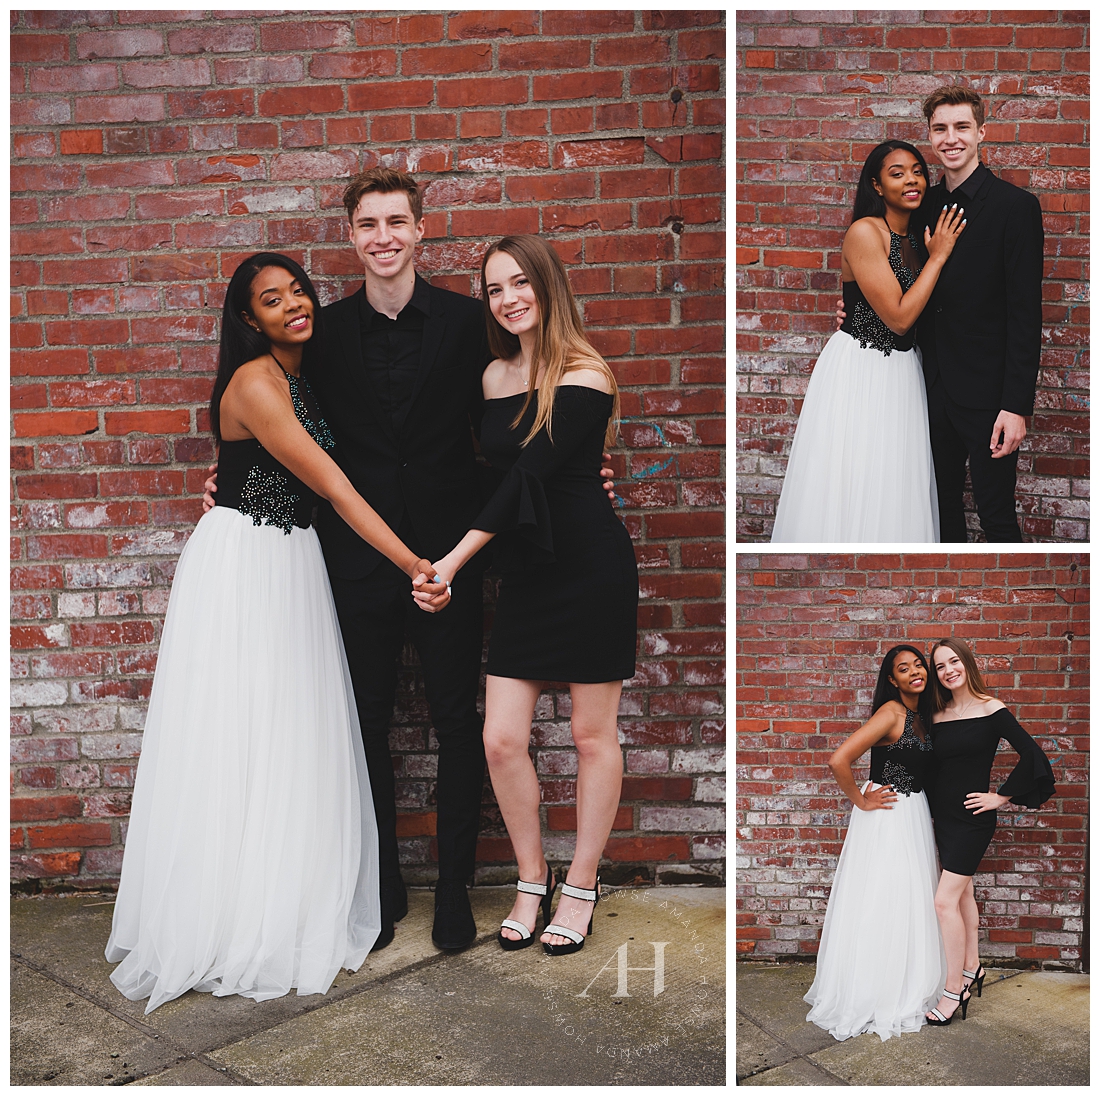 Prom Portraits in Front of a Brick Wall | Modern Prom Portraits in Downtown Tacoma, How to Wear Black and White Outfits for Prom, White and Black Ballgown for Prom, Black Suit for Prom | Photographed by Tacoma Senior Portrait Photographer Amanda Howse